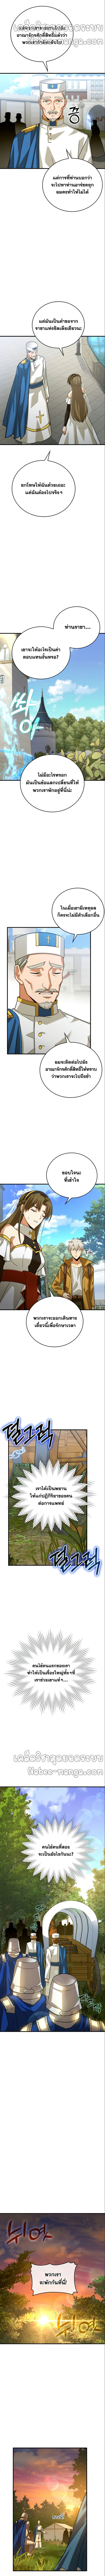 To Hell With Being A Saint, Iโ€m A Doctor เธ•เธญเธเธ—เธตเน27 (5)